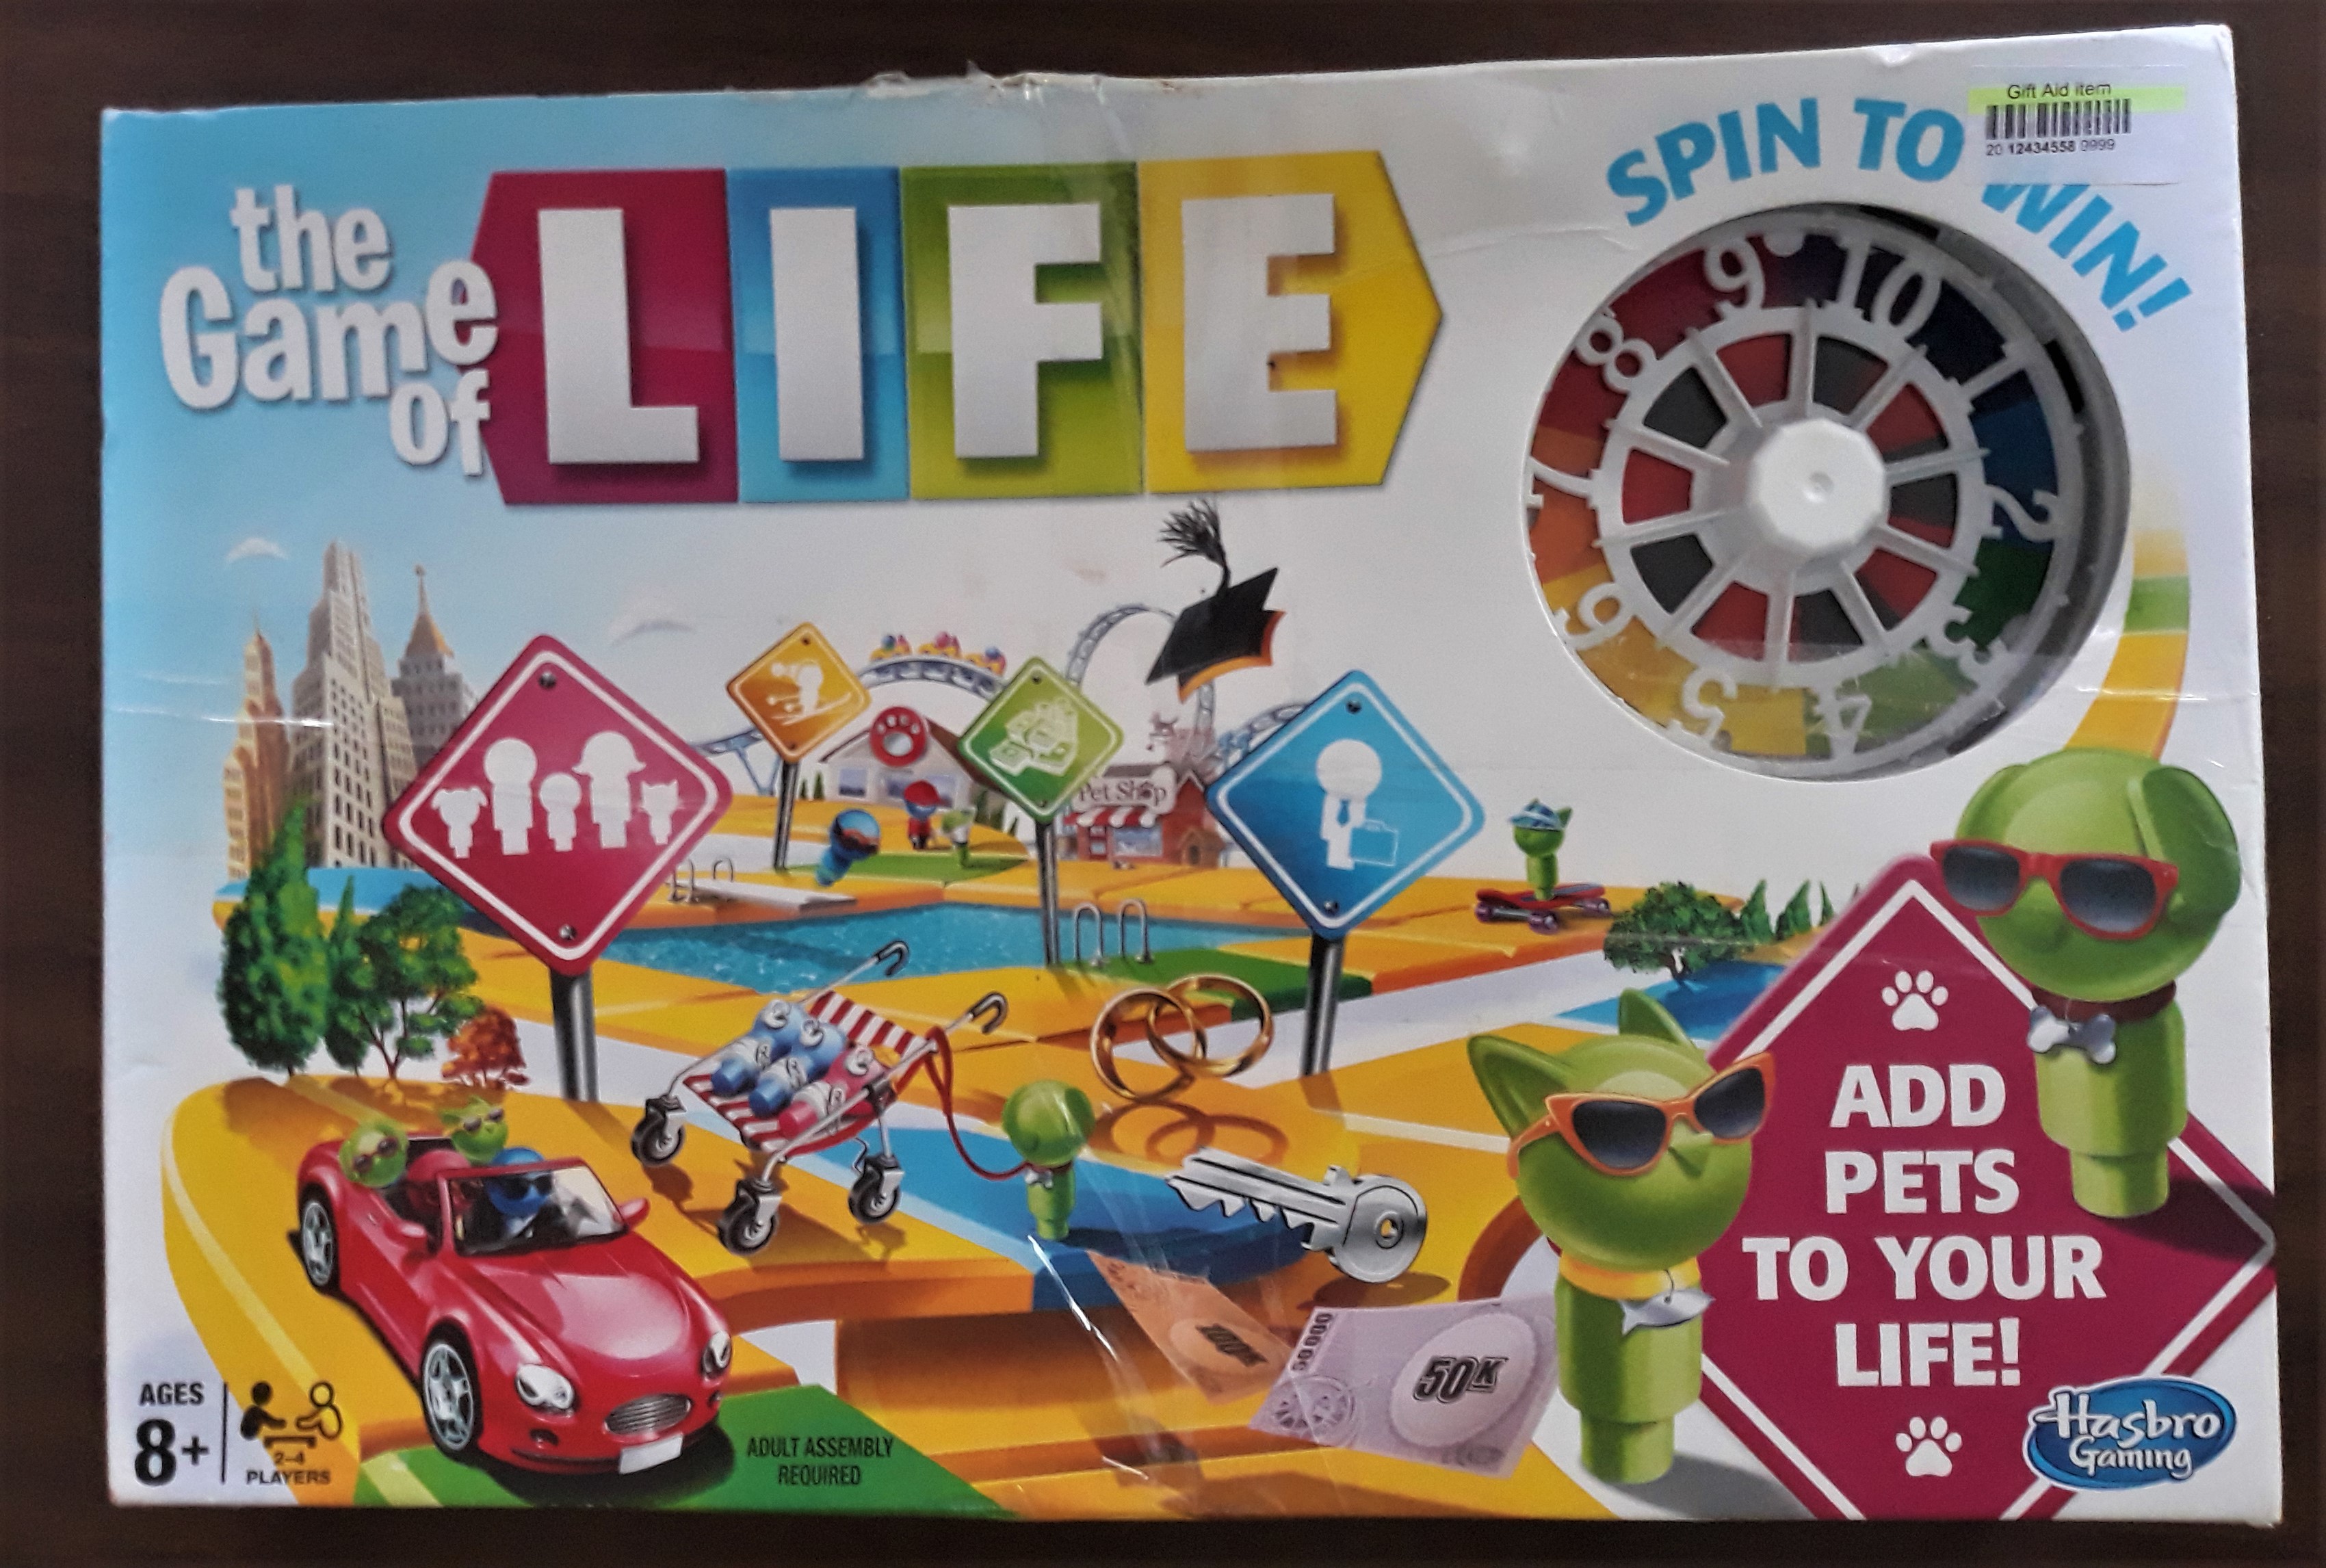 The Game of Life Board game